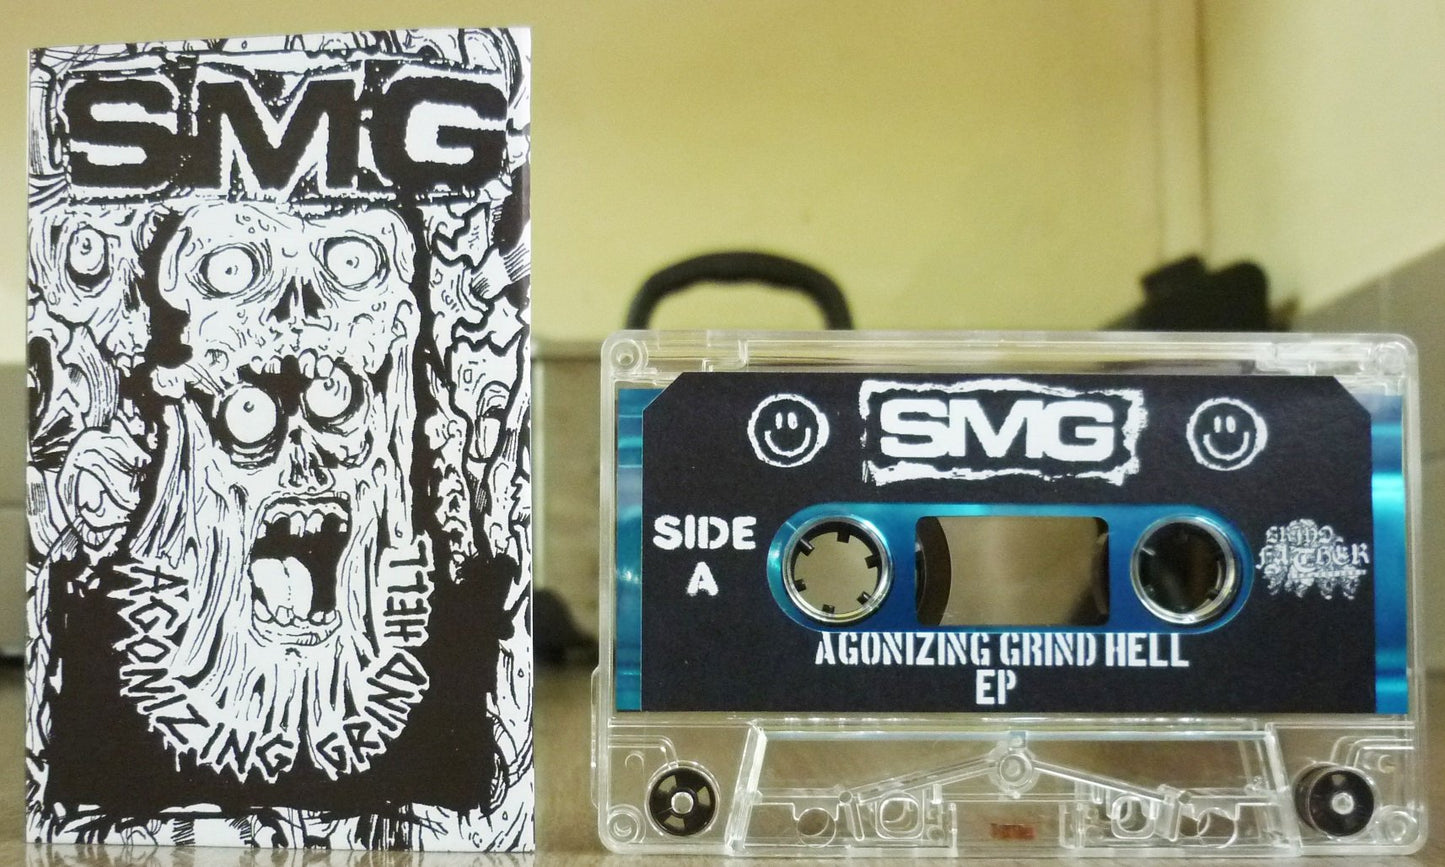 SMG - Agonizing Grind Hell Tape